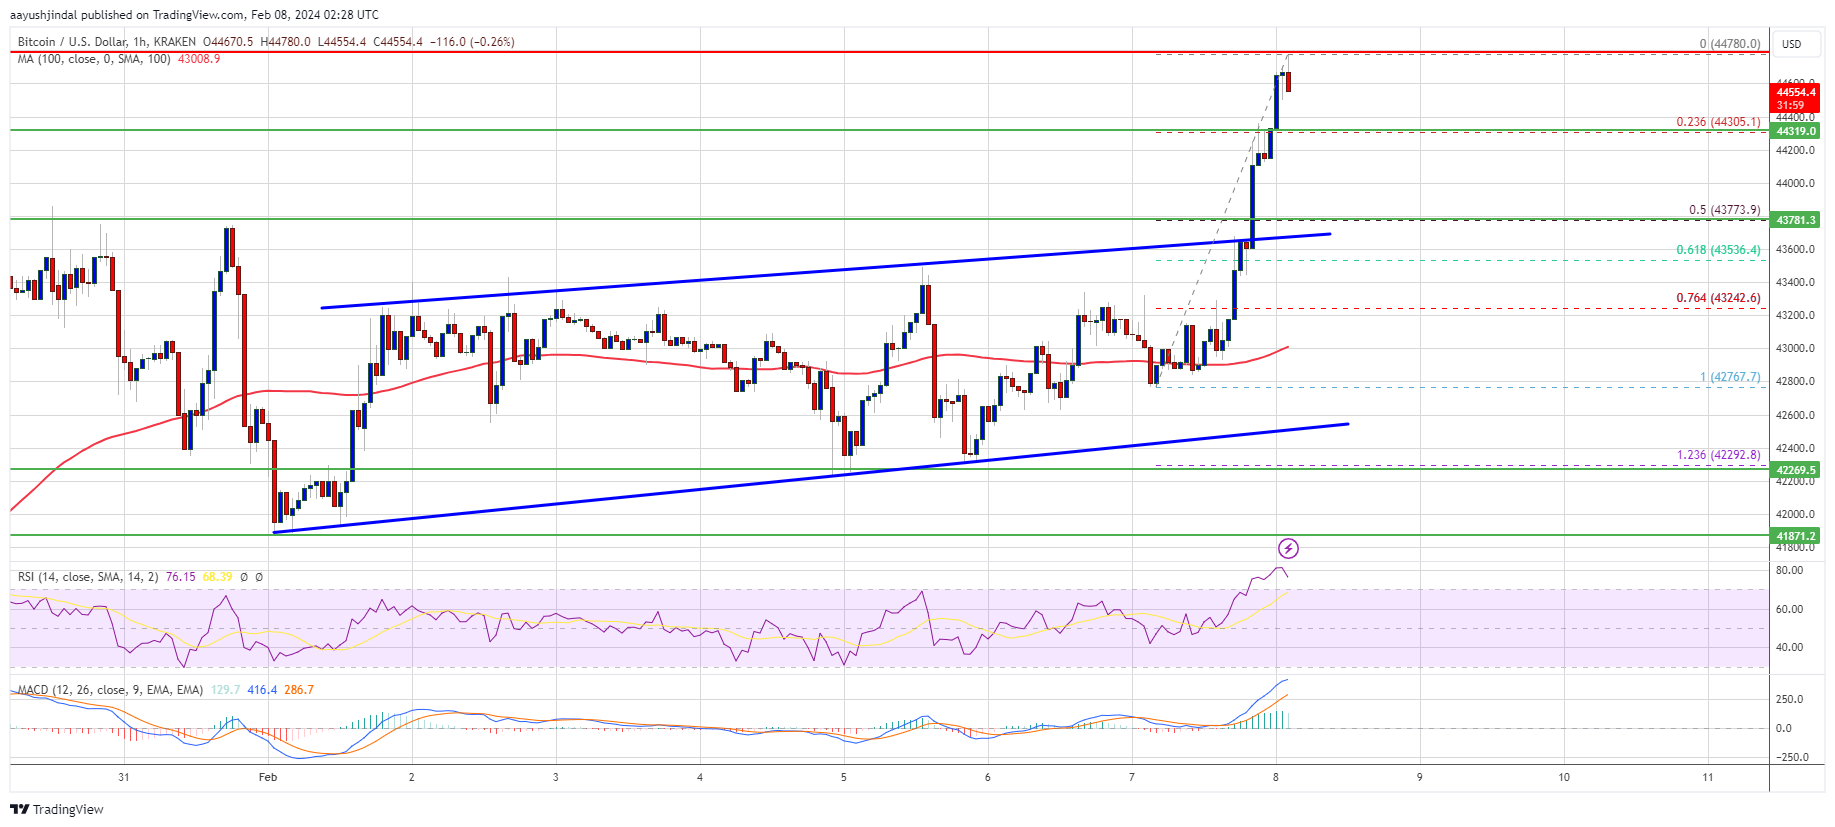 Bitcoin Price Surges Past Resistance, Is This The Start of Fresh Uptrend?